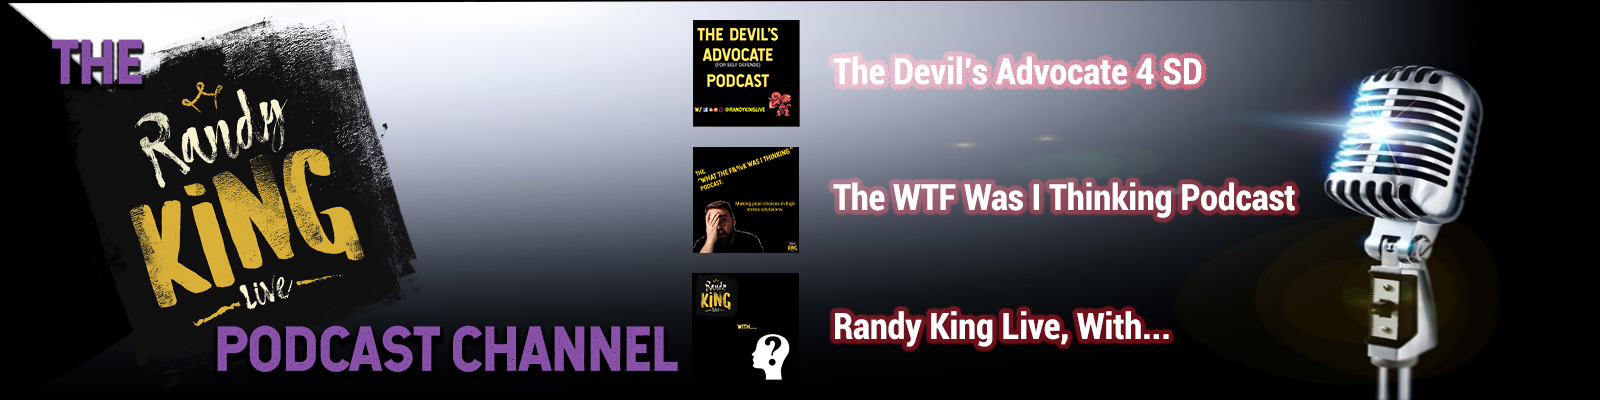 The Randy King Live Podcast Channel header image 1